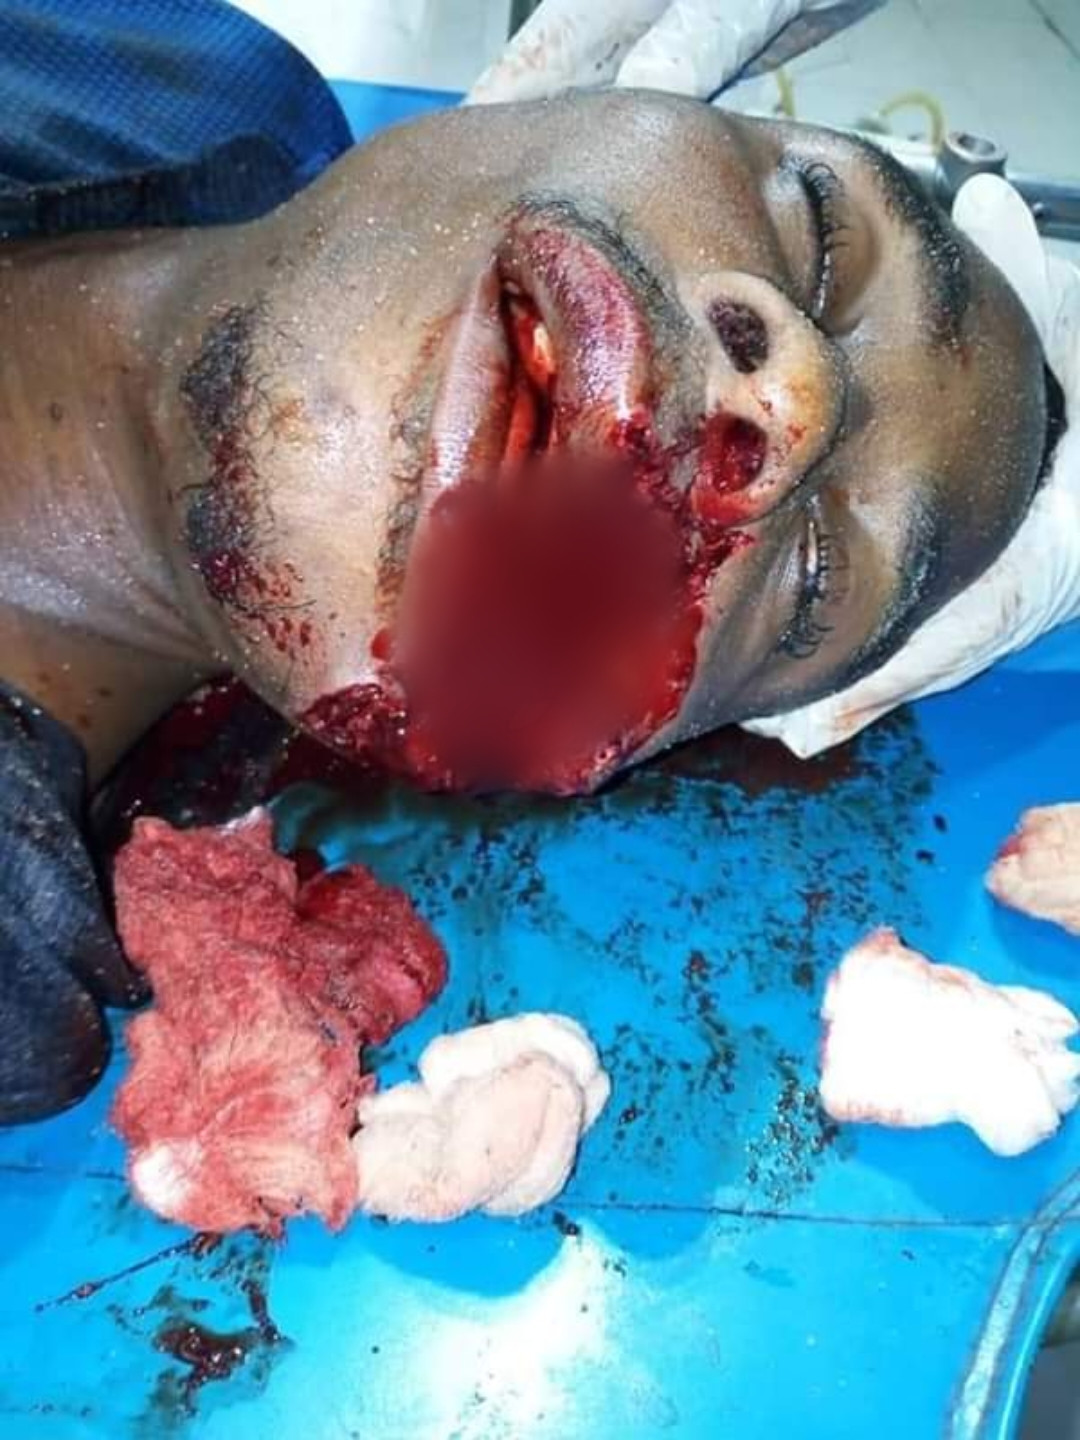 Cultists hack young man to death in Delta state (graphic photos)